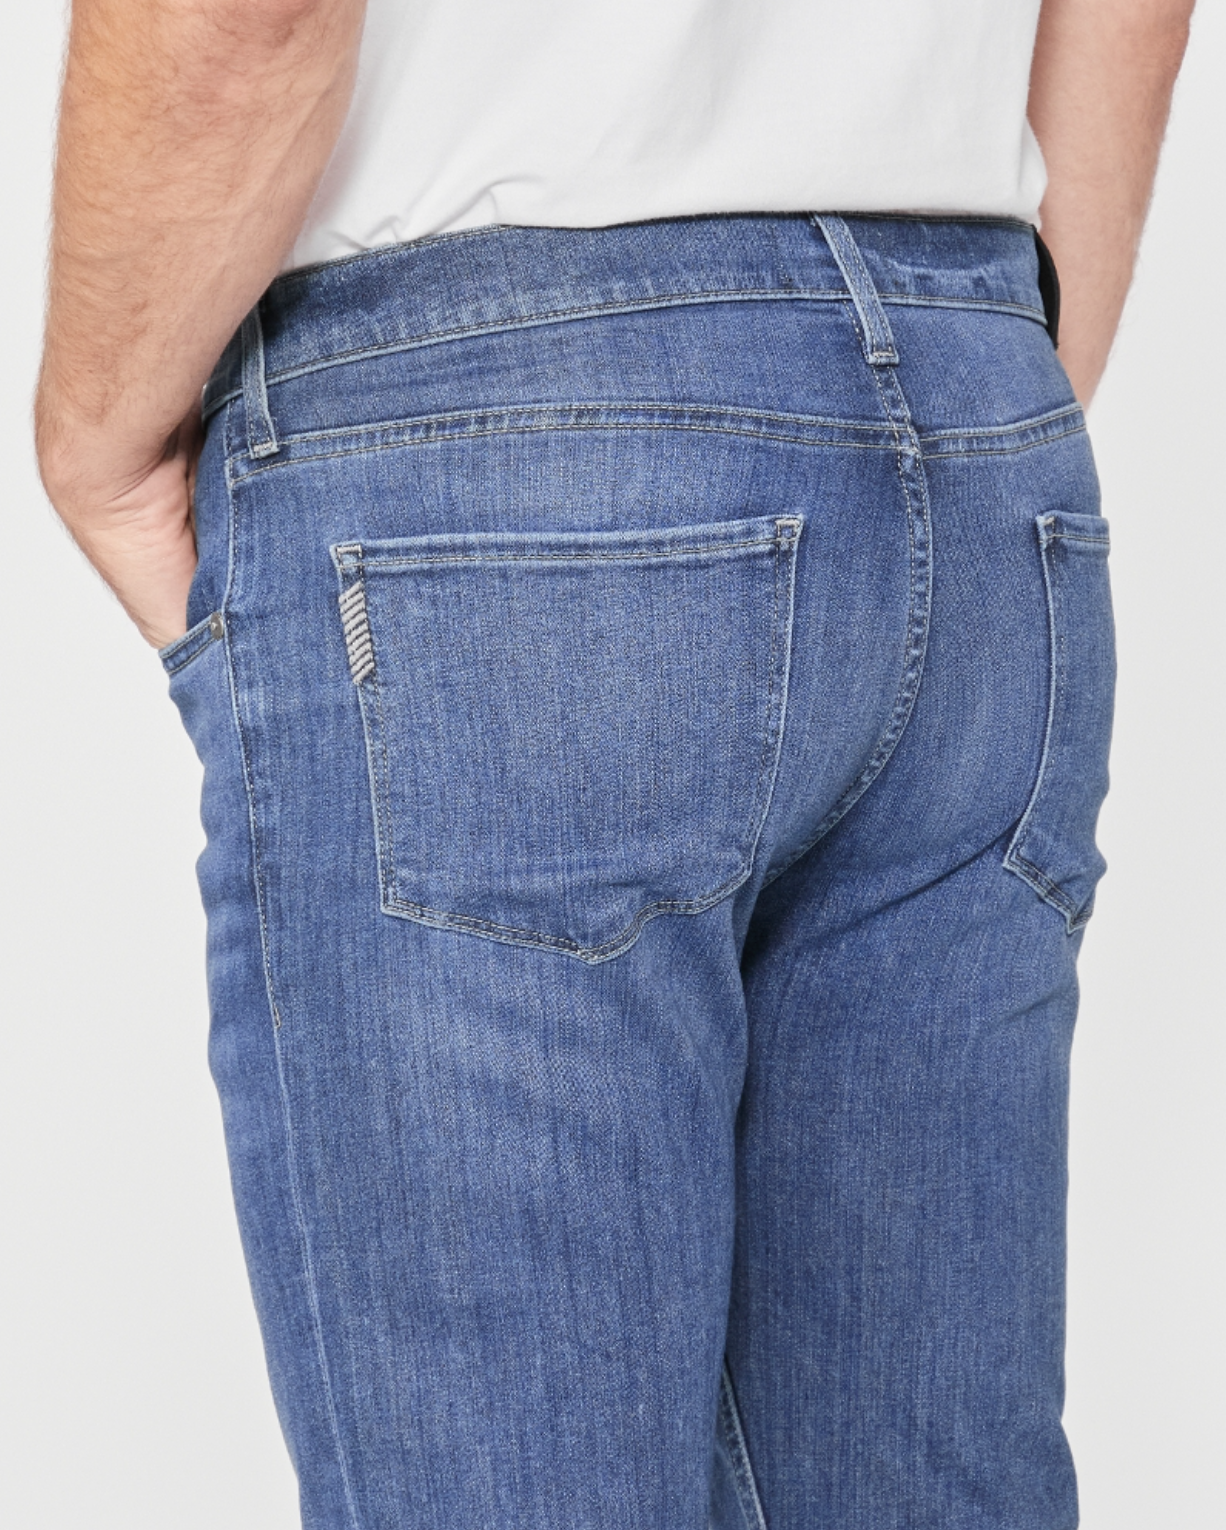 close up rear view of the federal slim straight jean from paige in redding blue, showing pocket detail 